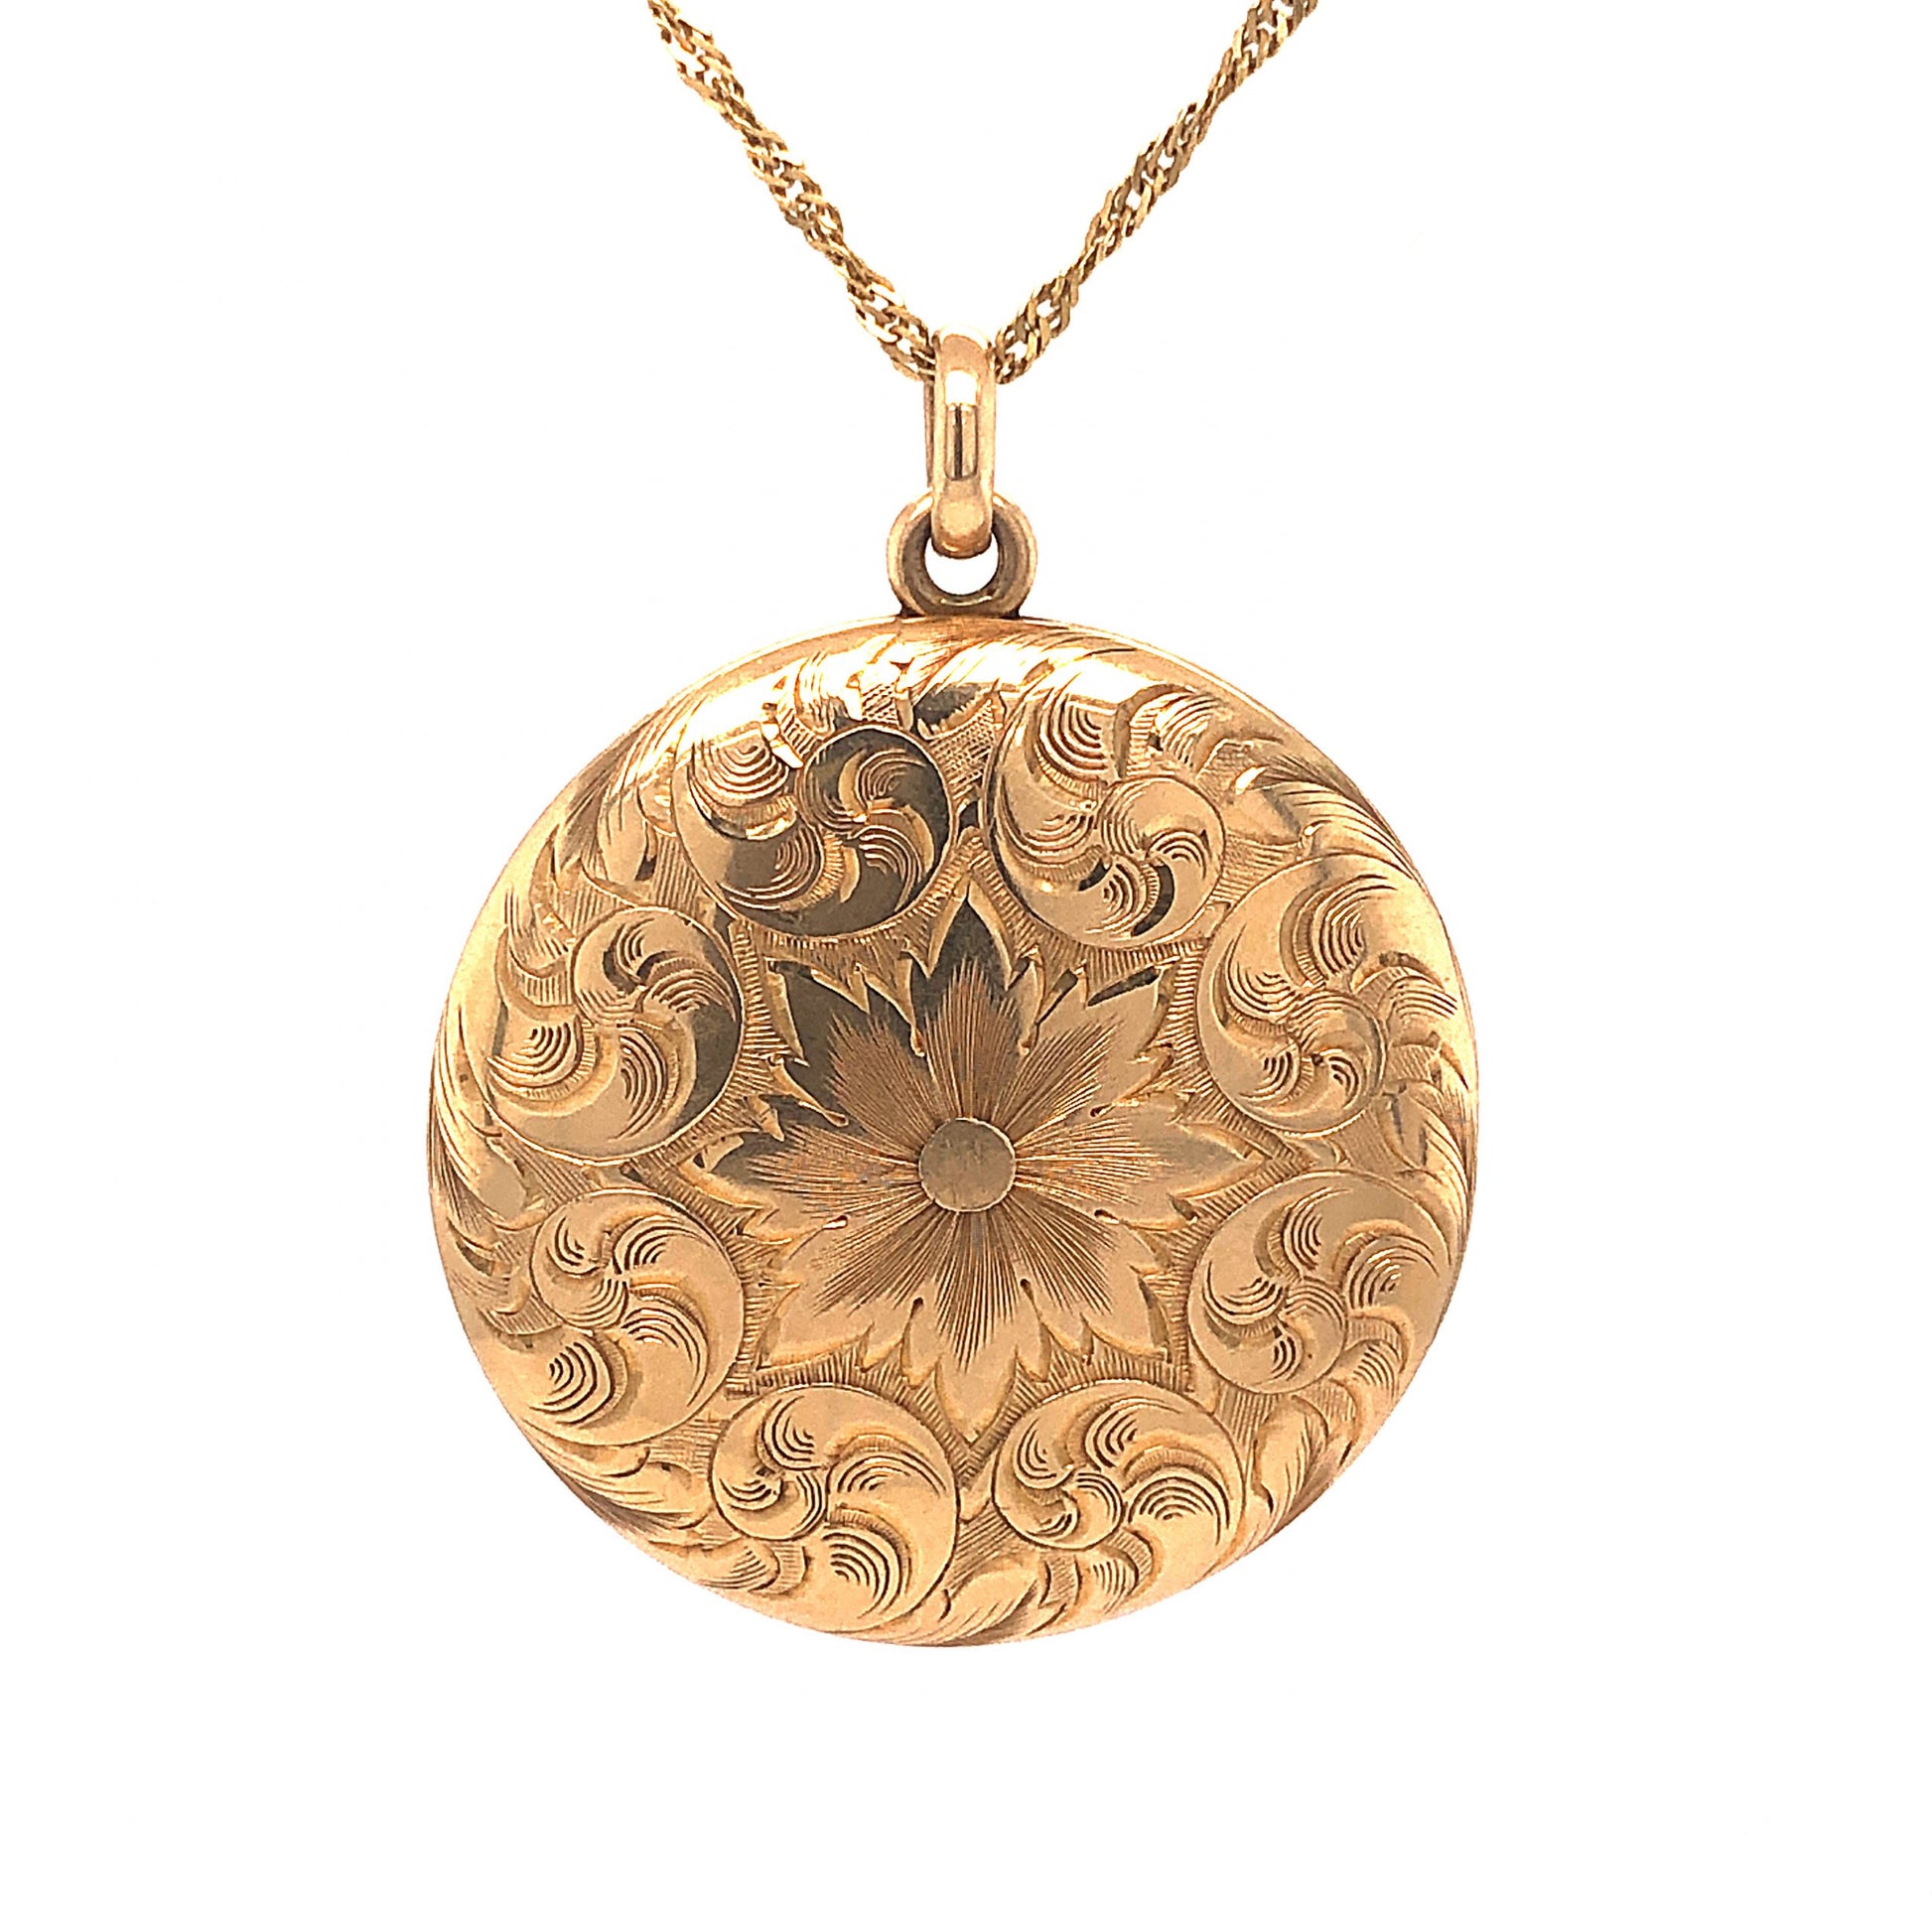 Victorian Engraved Round Locket Necklace in 14k Yellow GoldComposition: 14 Karat Yellow Gold Total Gram Weight: 16.3 g Inscription: 14k, From Business Associates Smith Premier Typewriter Co to Amy 31 - 1910 Chicago
      